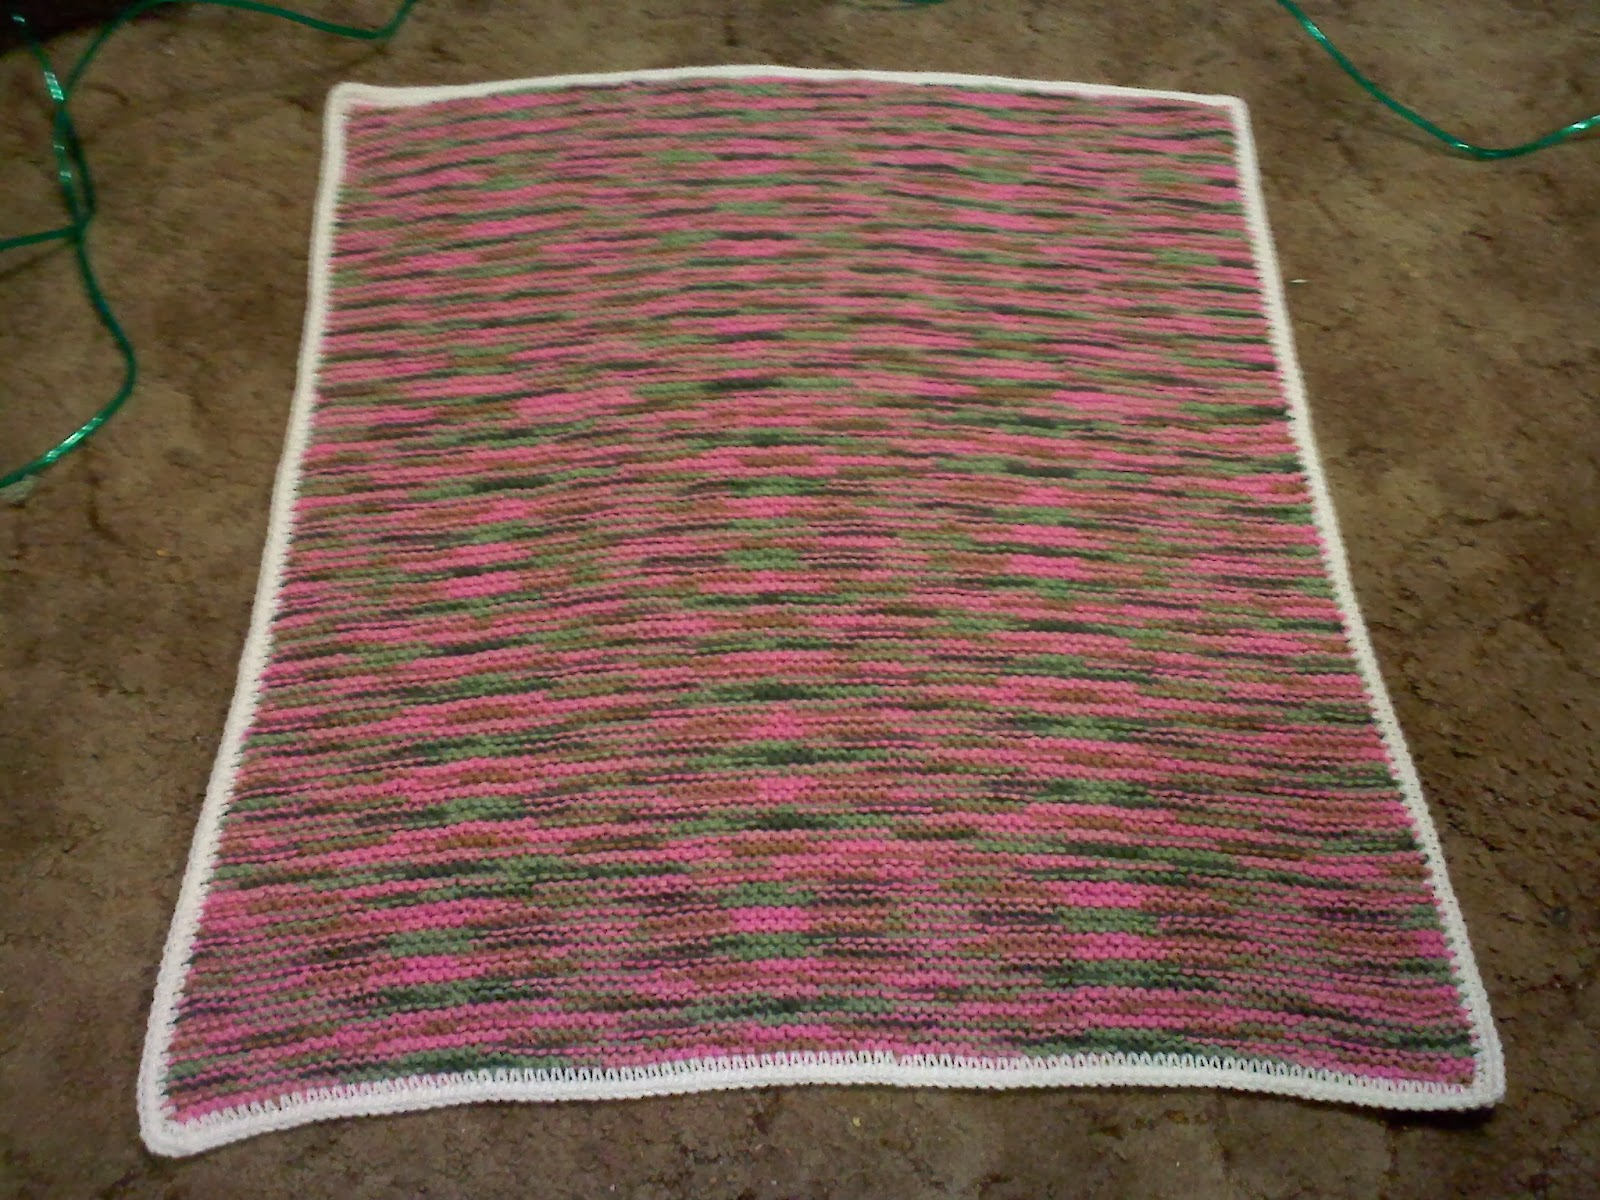 Crochet Camo Baby Blanket Pattern Family Books And Crochetoh My Pink Camo Knitted Ba Blanket